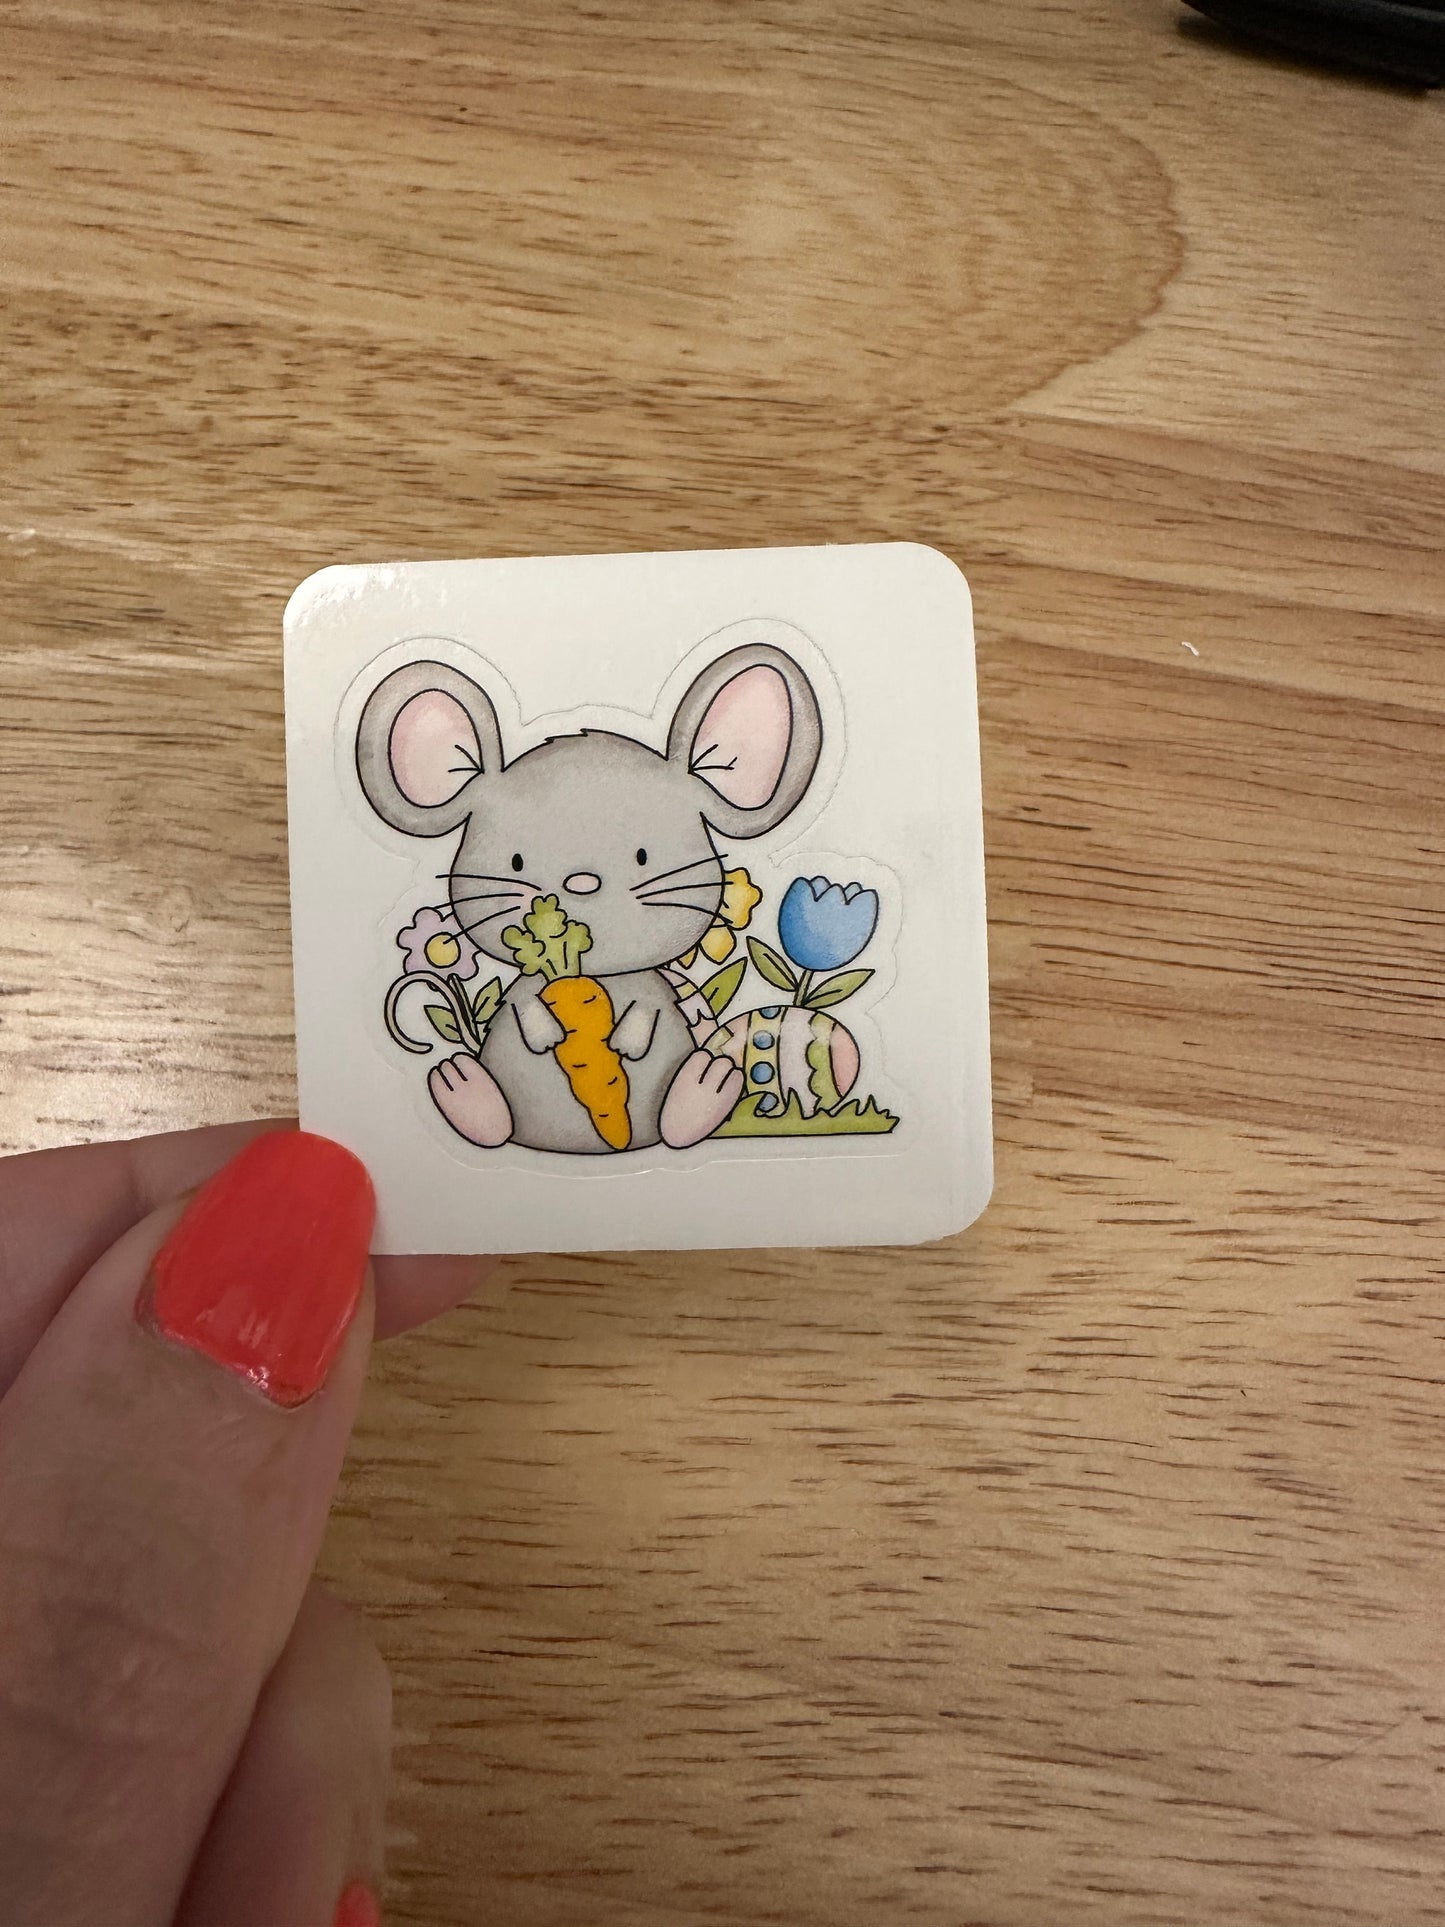 Mouse and carrot STICKER, Cute Mouse sticker, Cute Mouse with Blue tulip sticker, Holographic option, Grey Mouse with Carrot